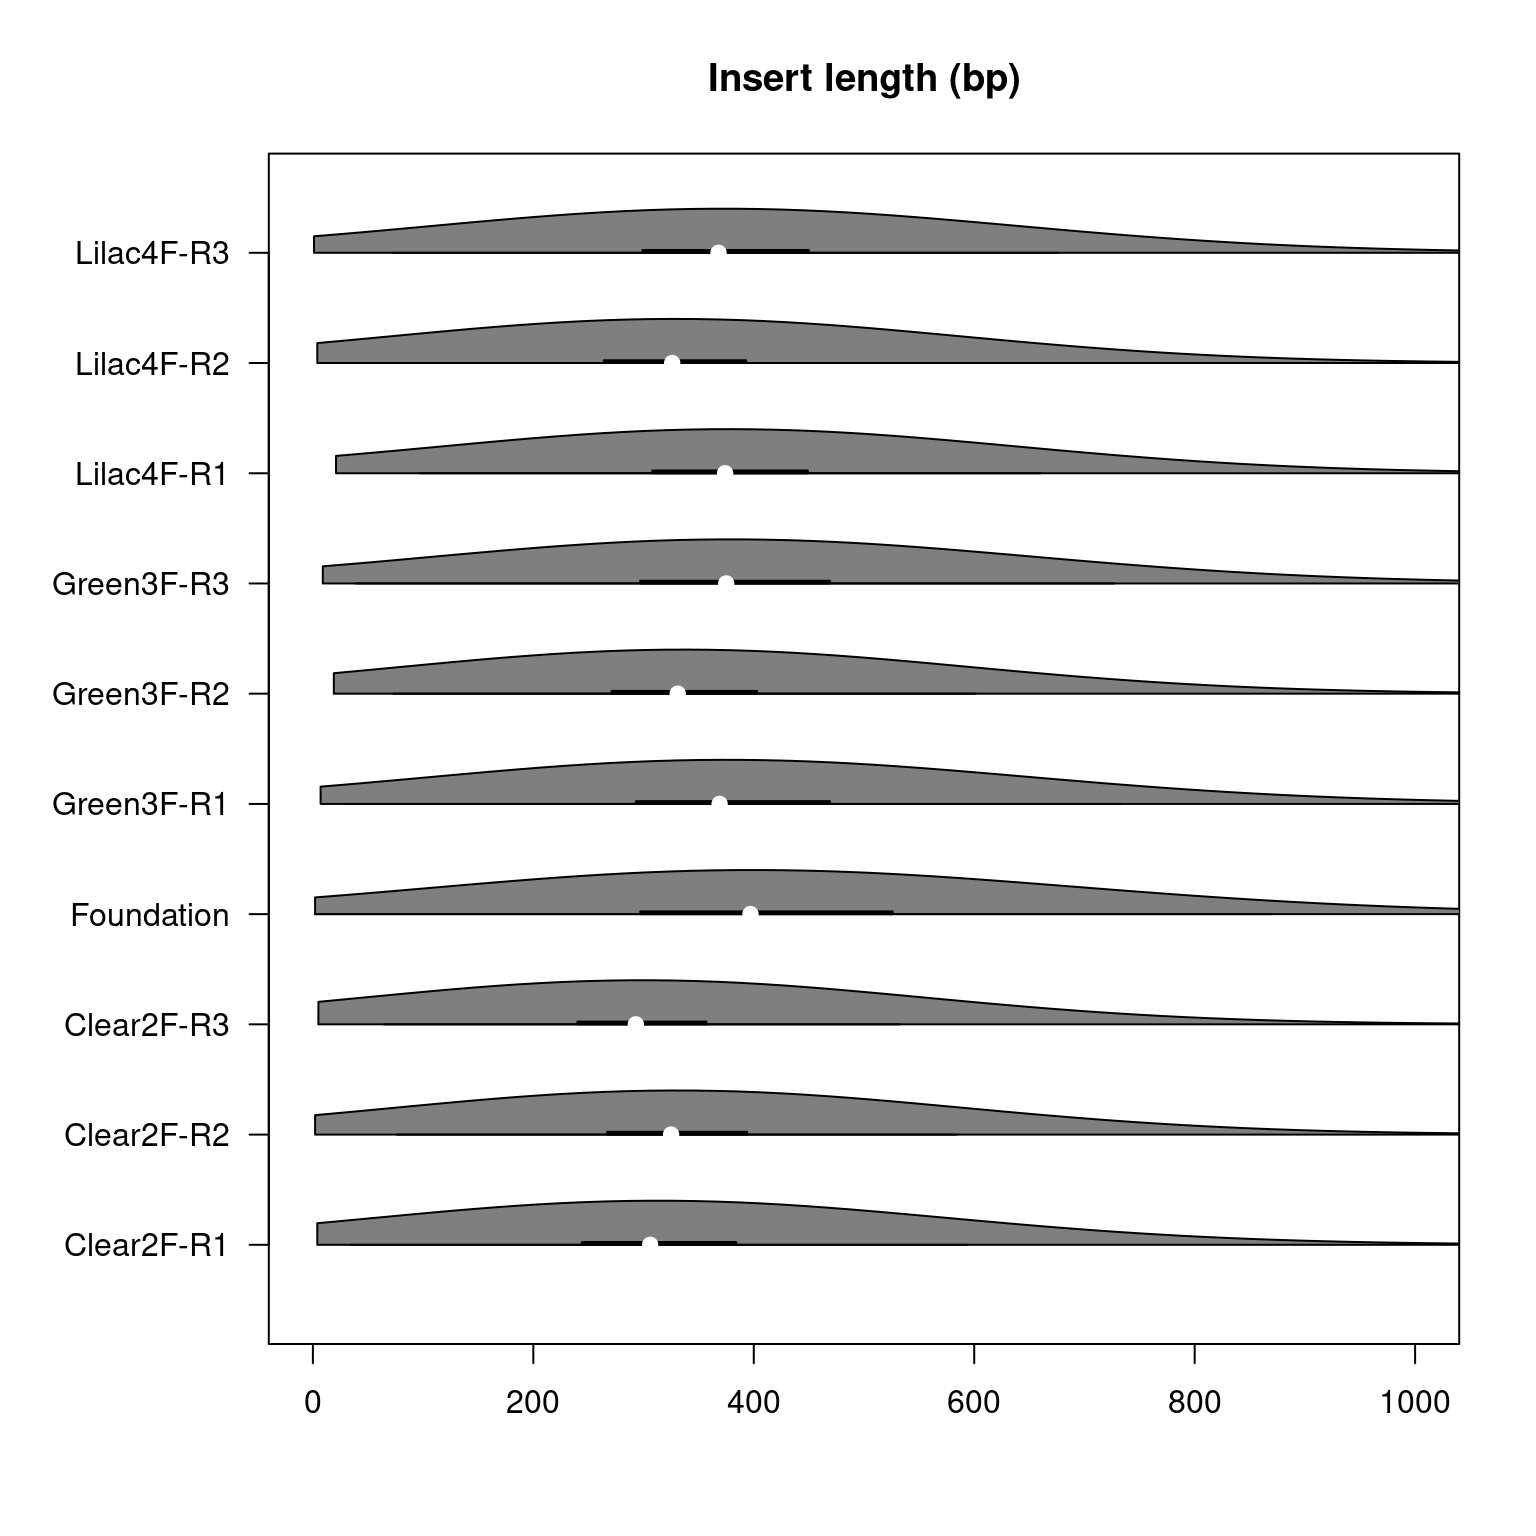 Violin plot displaying the insert lengths in base pairs within each sample of the main study. The ends of the black line under each violin indicate the interquartile range and the white indentation within the black line indicates the median.